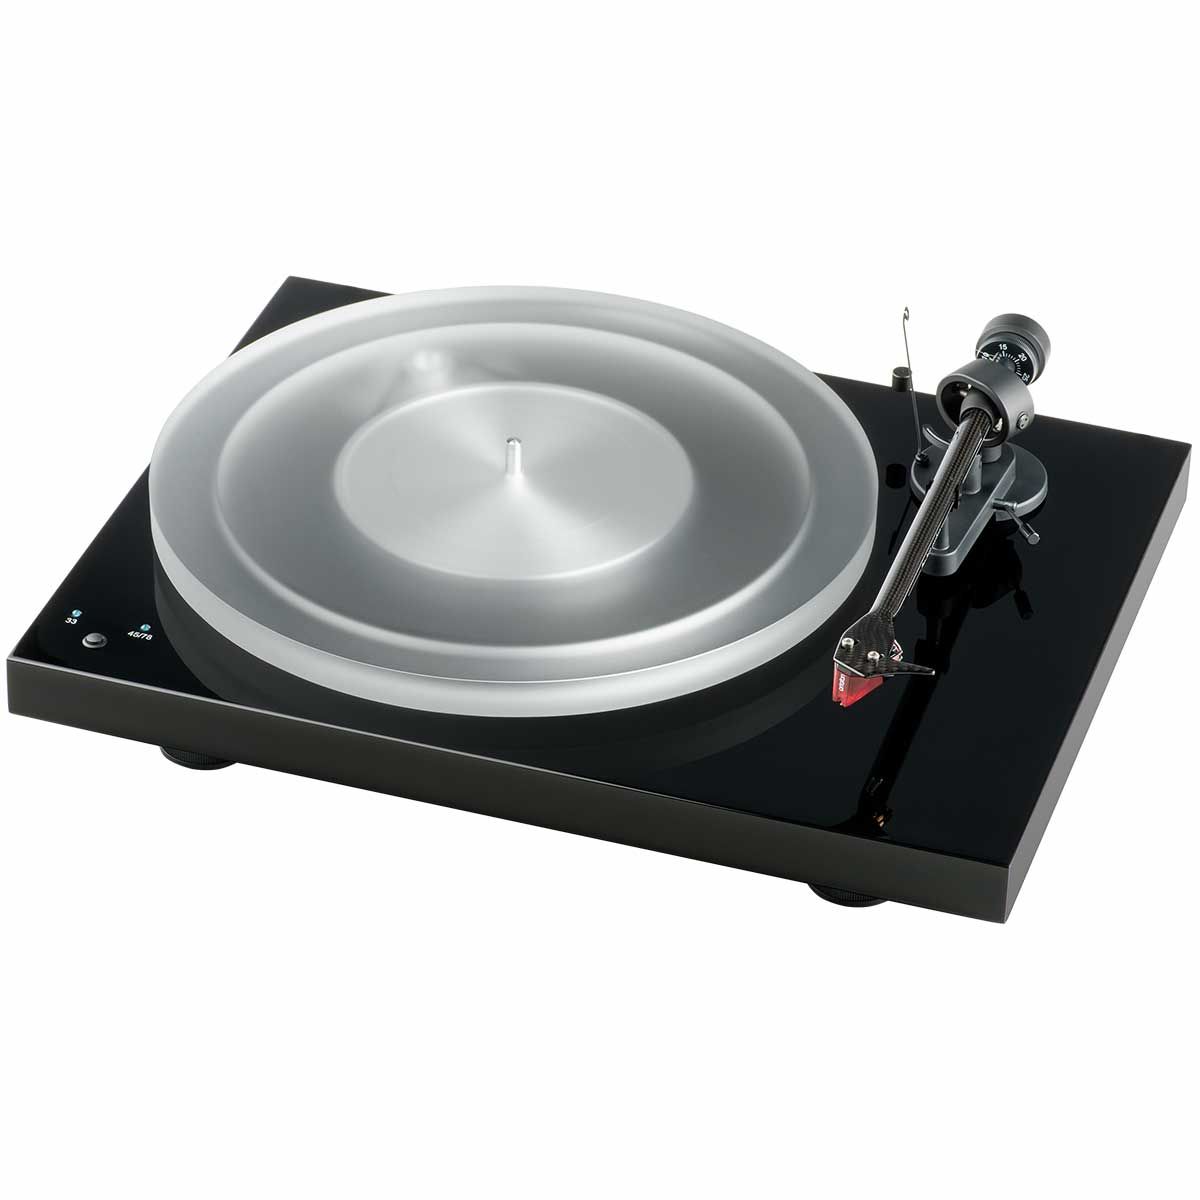 Pro-Ject Debut Aluminum Subplatter on turntable with acrylic platter